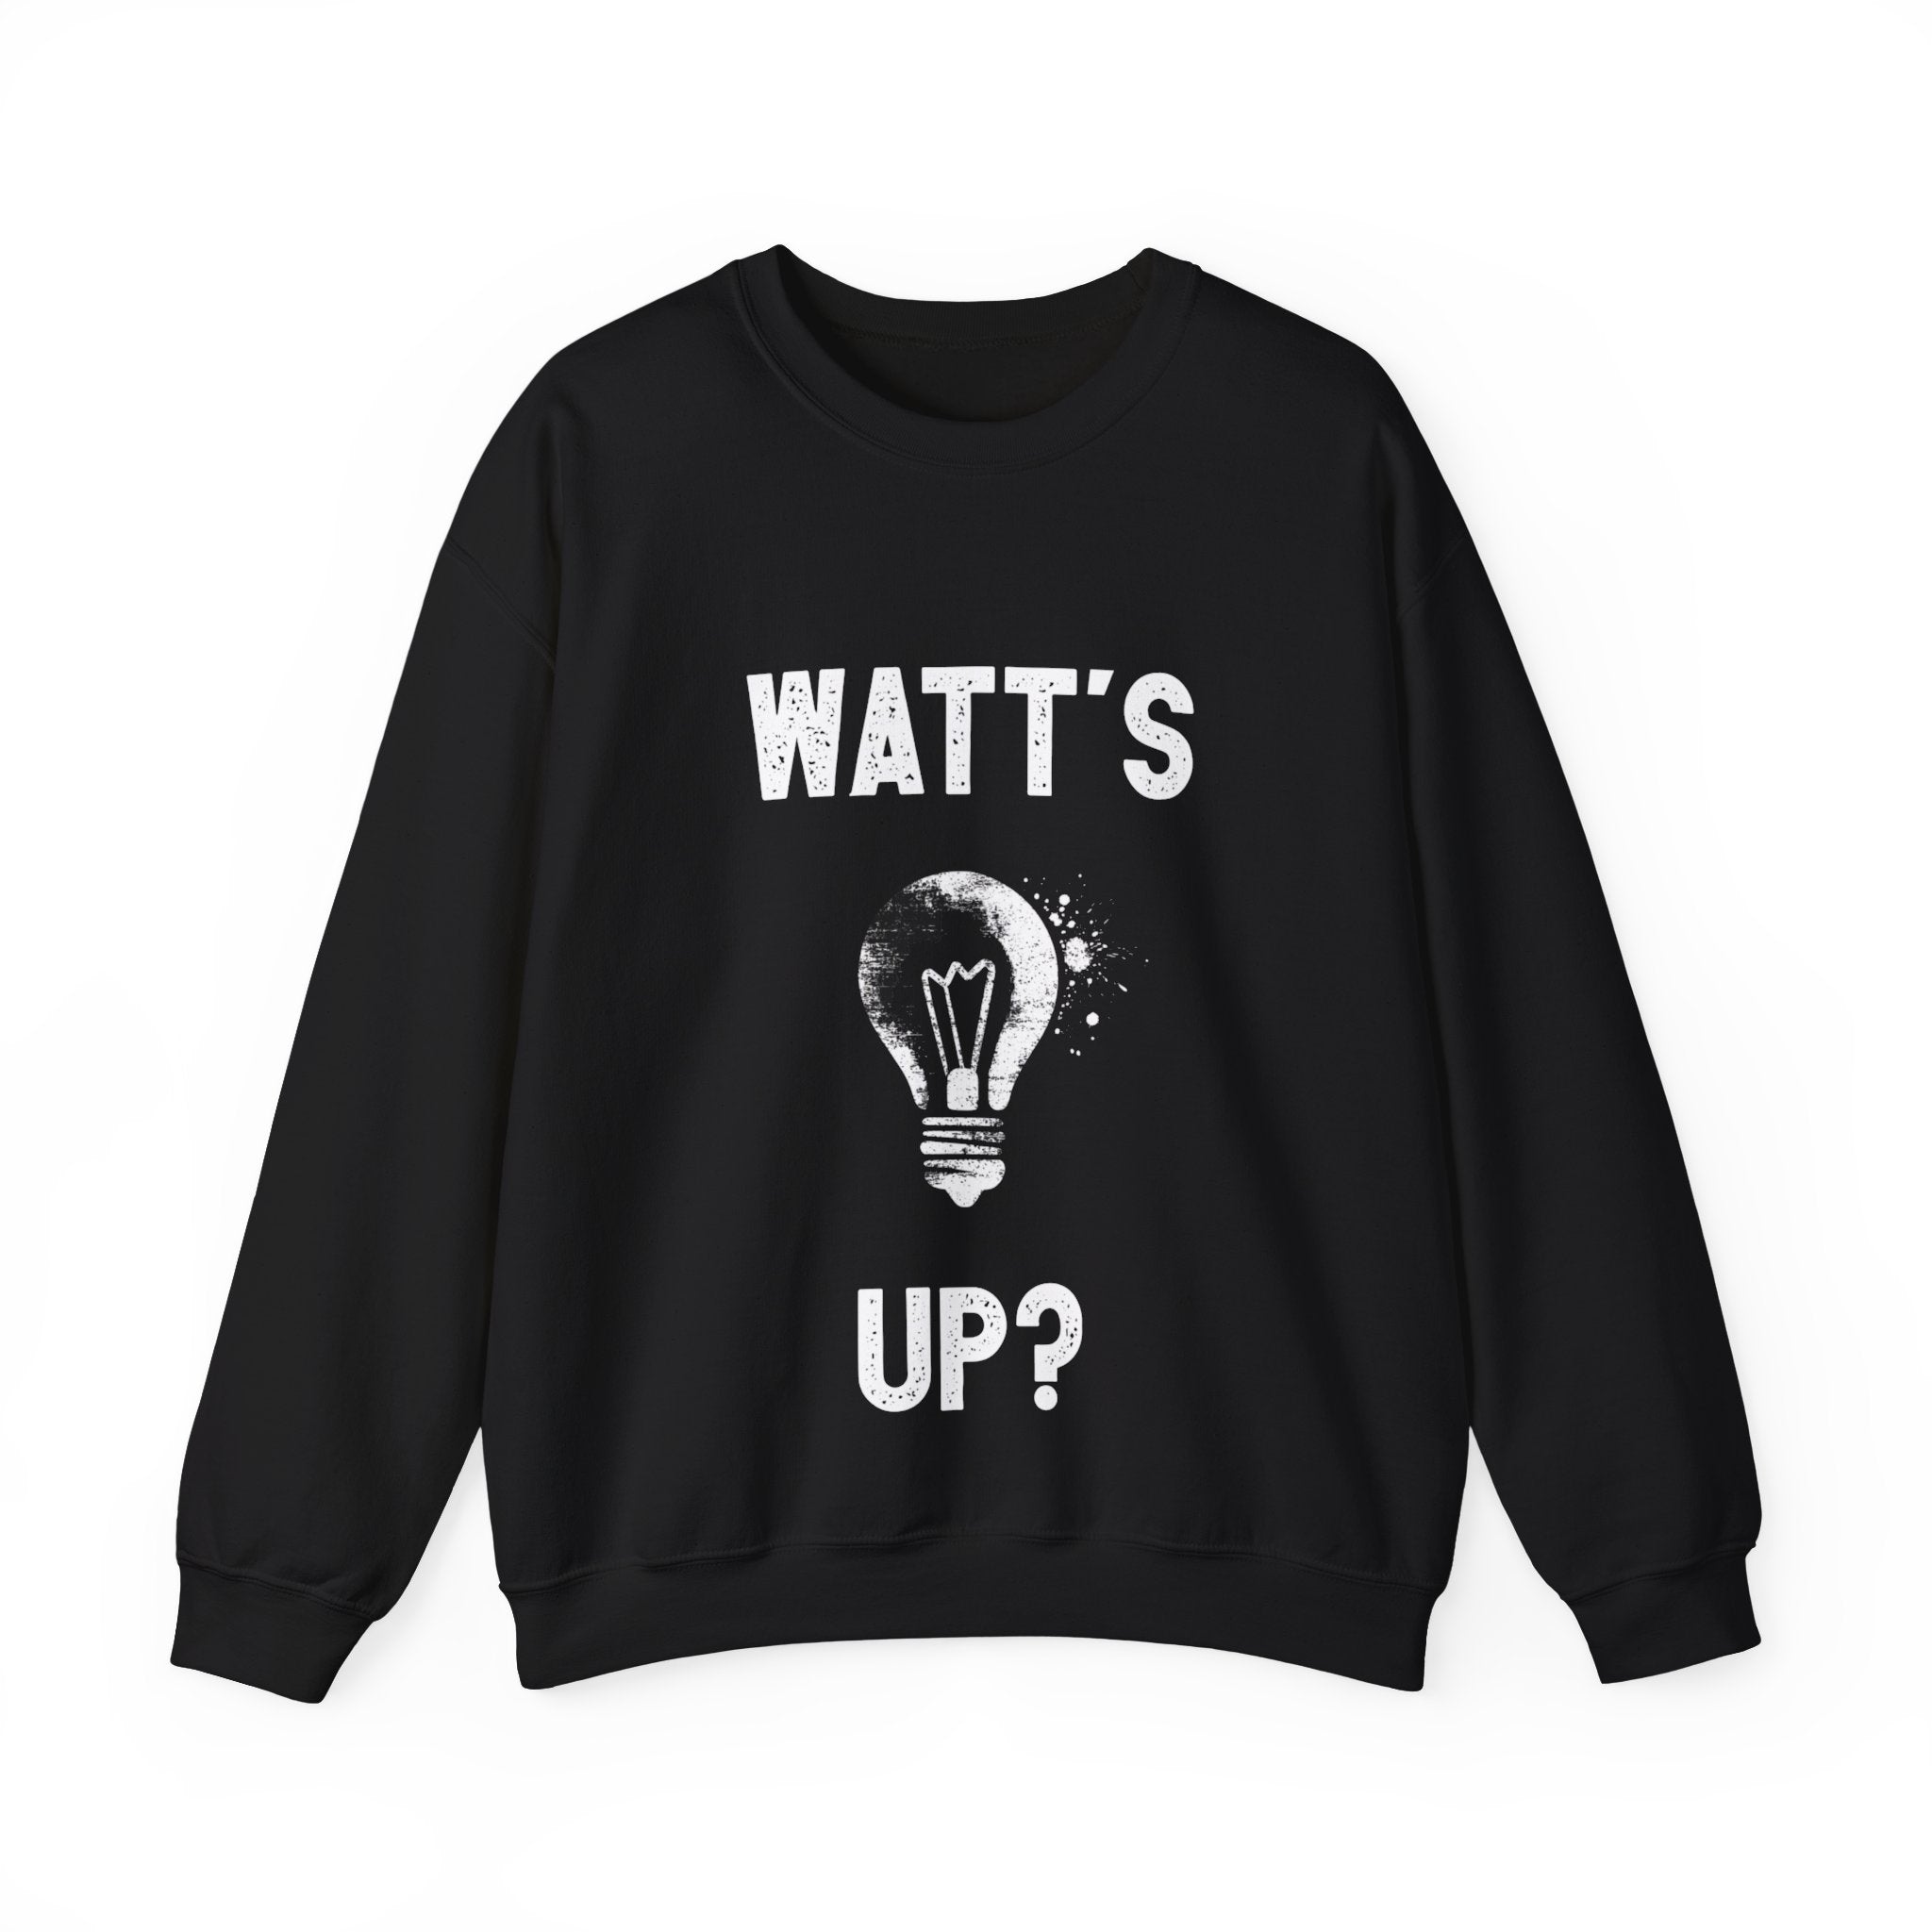 Watts Up - Sweatshirt with white graphic text saying "Watt's Up?" and an illustration of a light bulb in the center, offering a cozy yet trendy vibe.